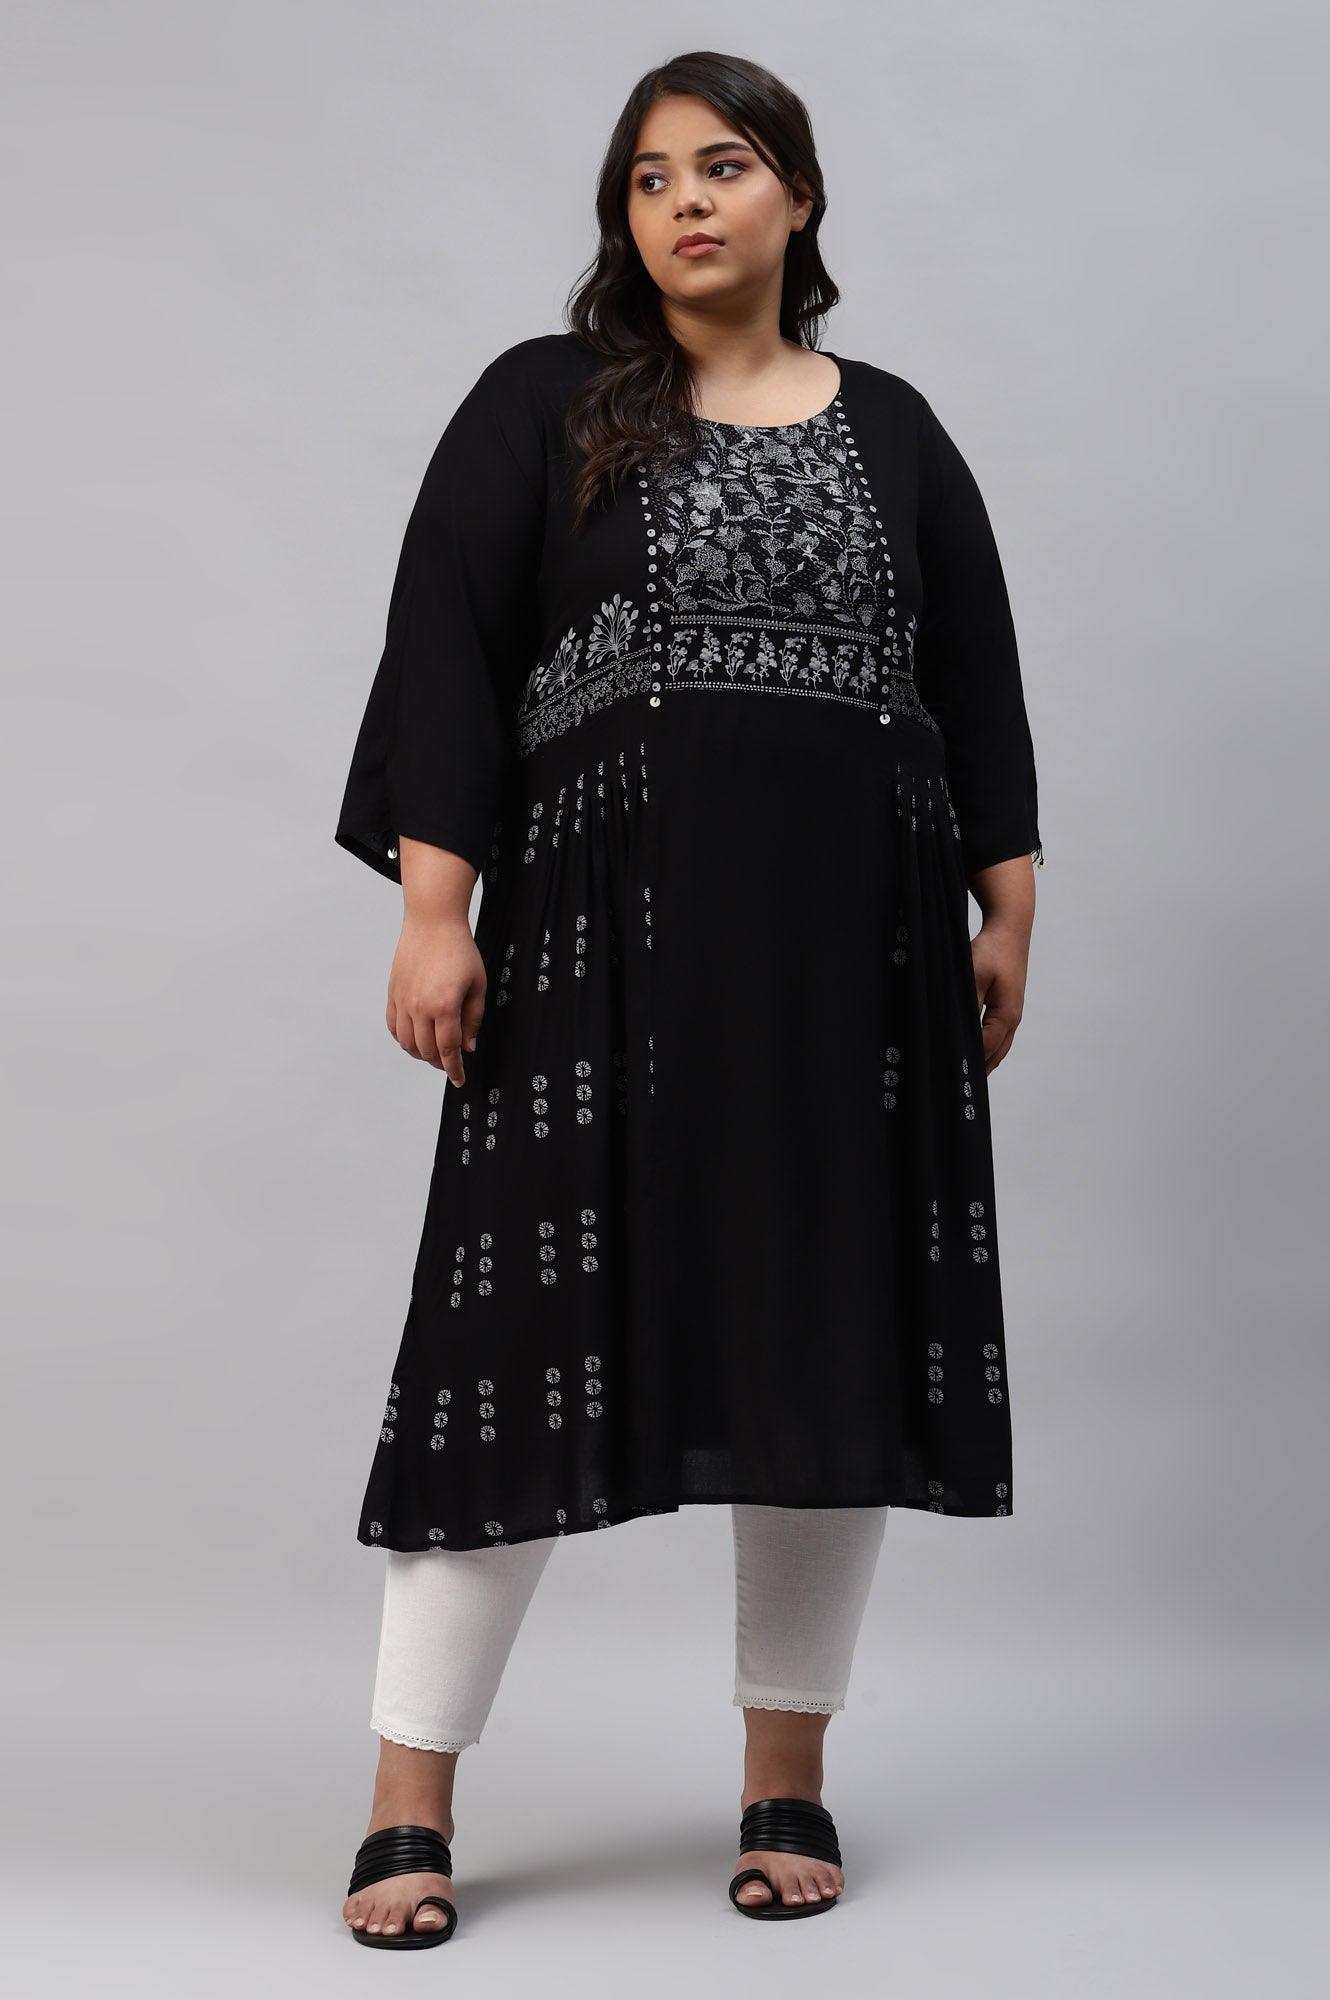 Plus Size Black Floral Side Pleated kurta In Round Neck - wforwoman